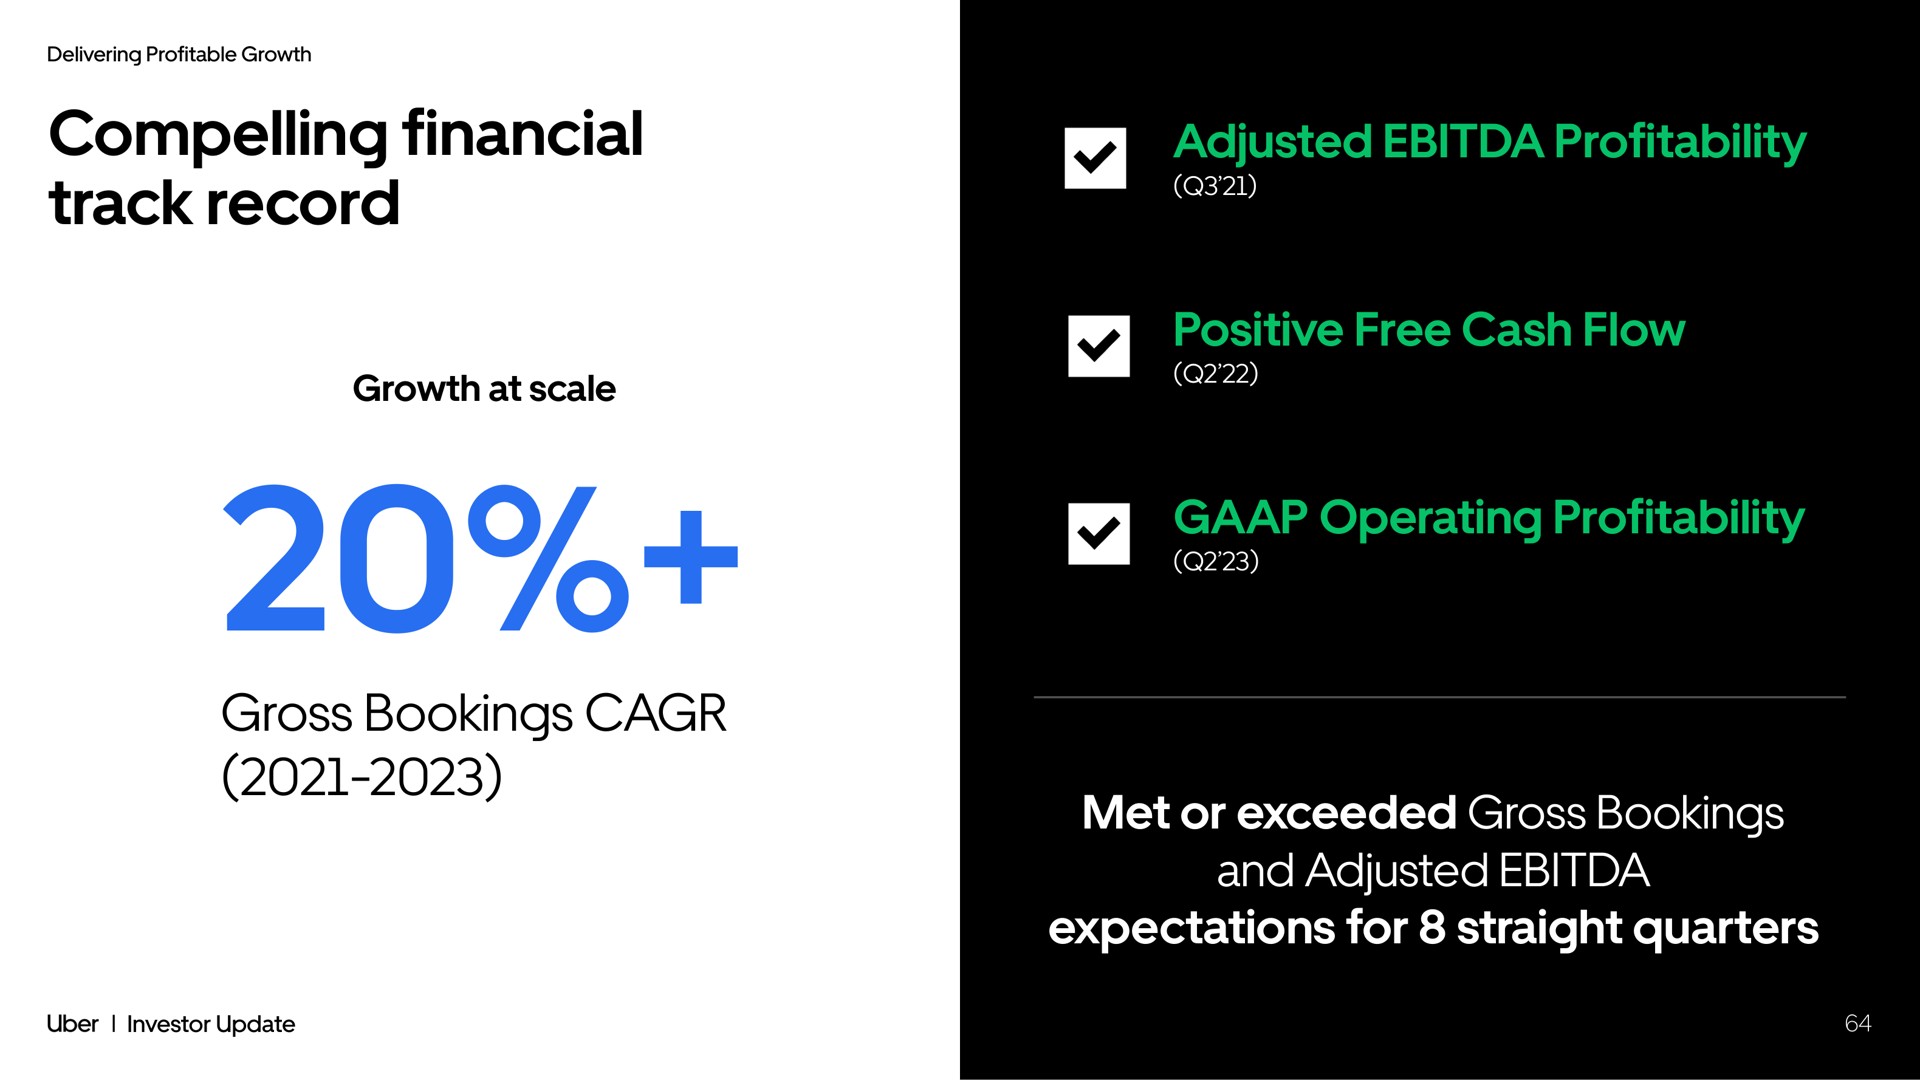 compelling financial track record growth at scale gross bookings adjusted profitability positive free cash flow operating profitability met or exceeded gross bookings and adjusted expectations for straight quarters | Uber